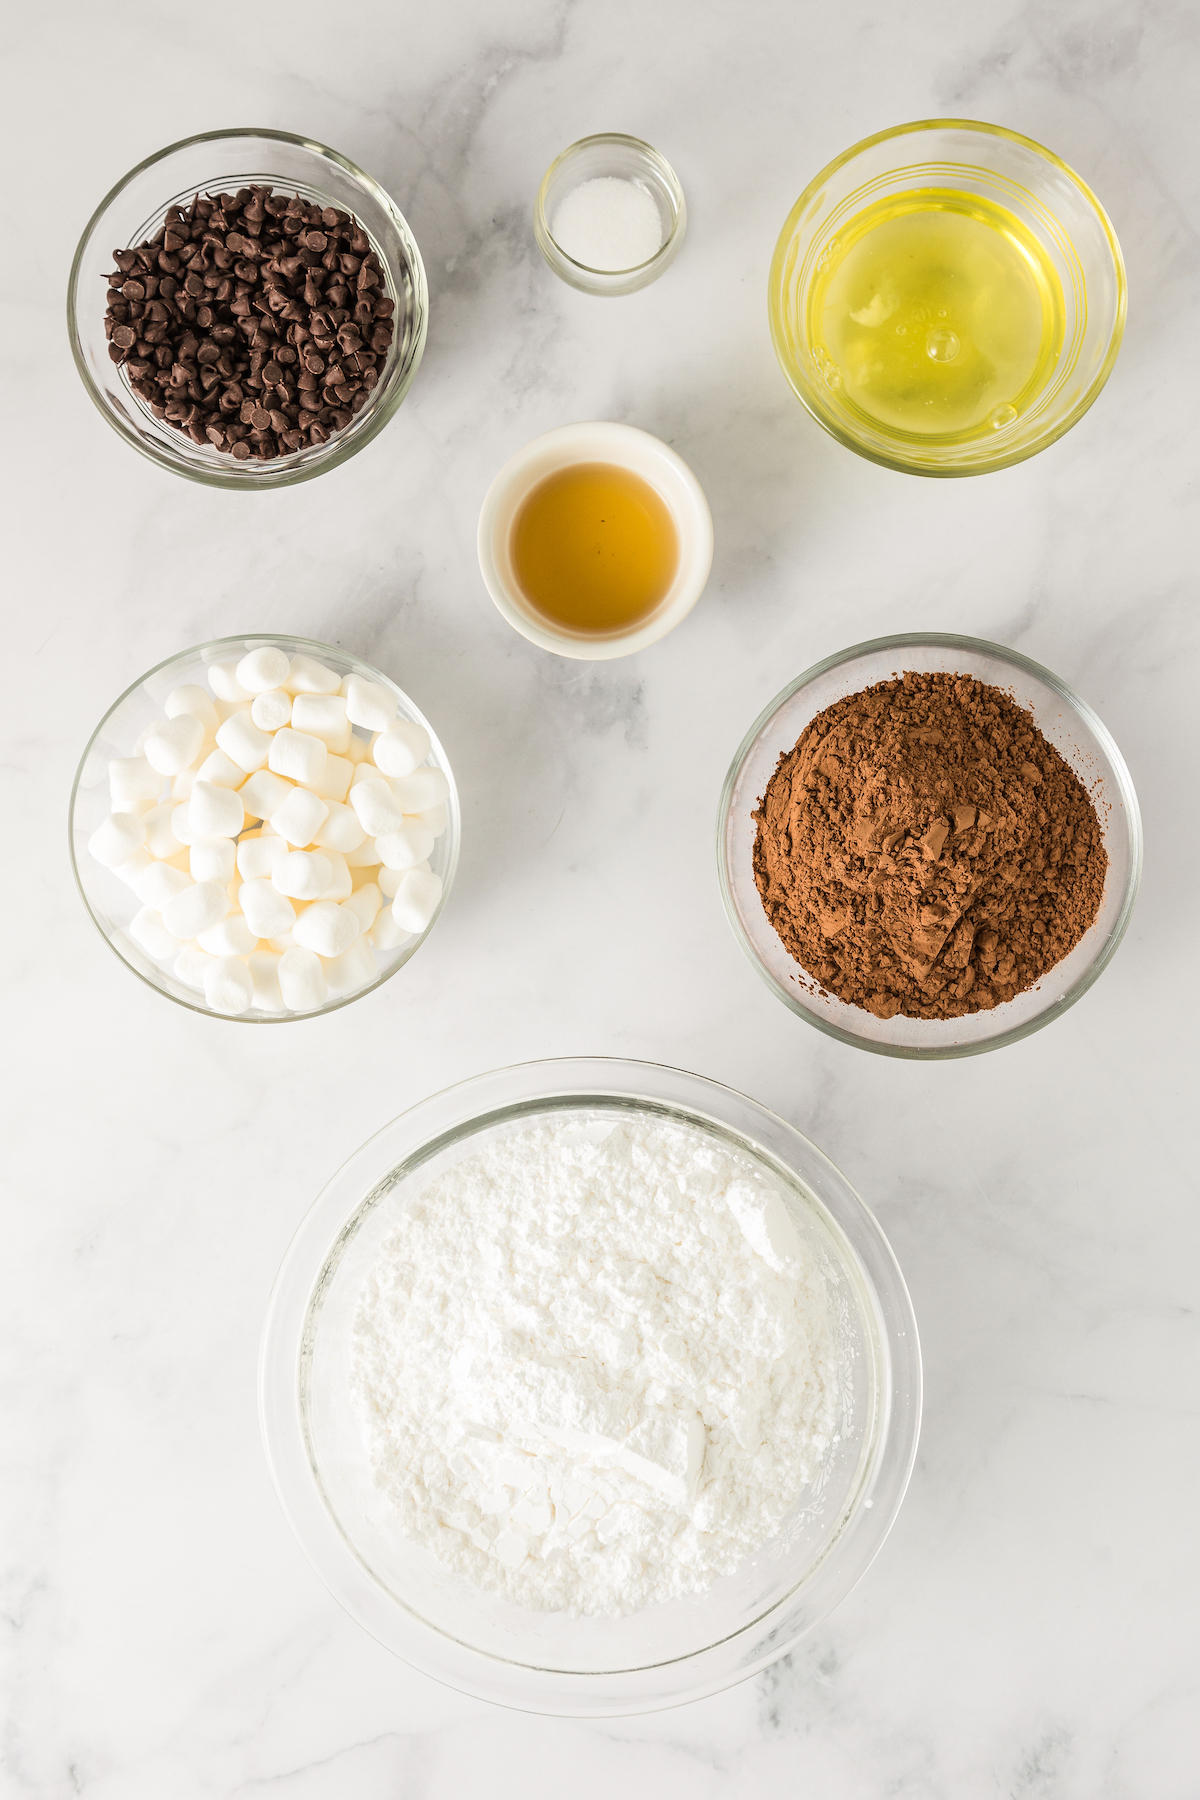 Ingredients for chocolate marshmallow cookies arranged on a work surface.